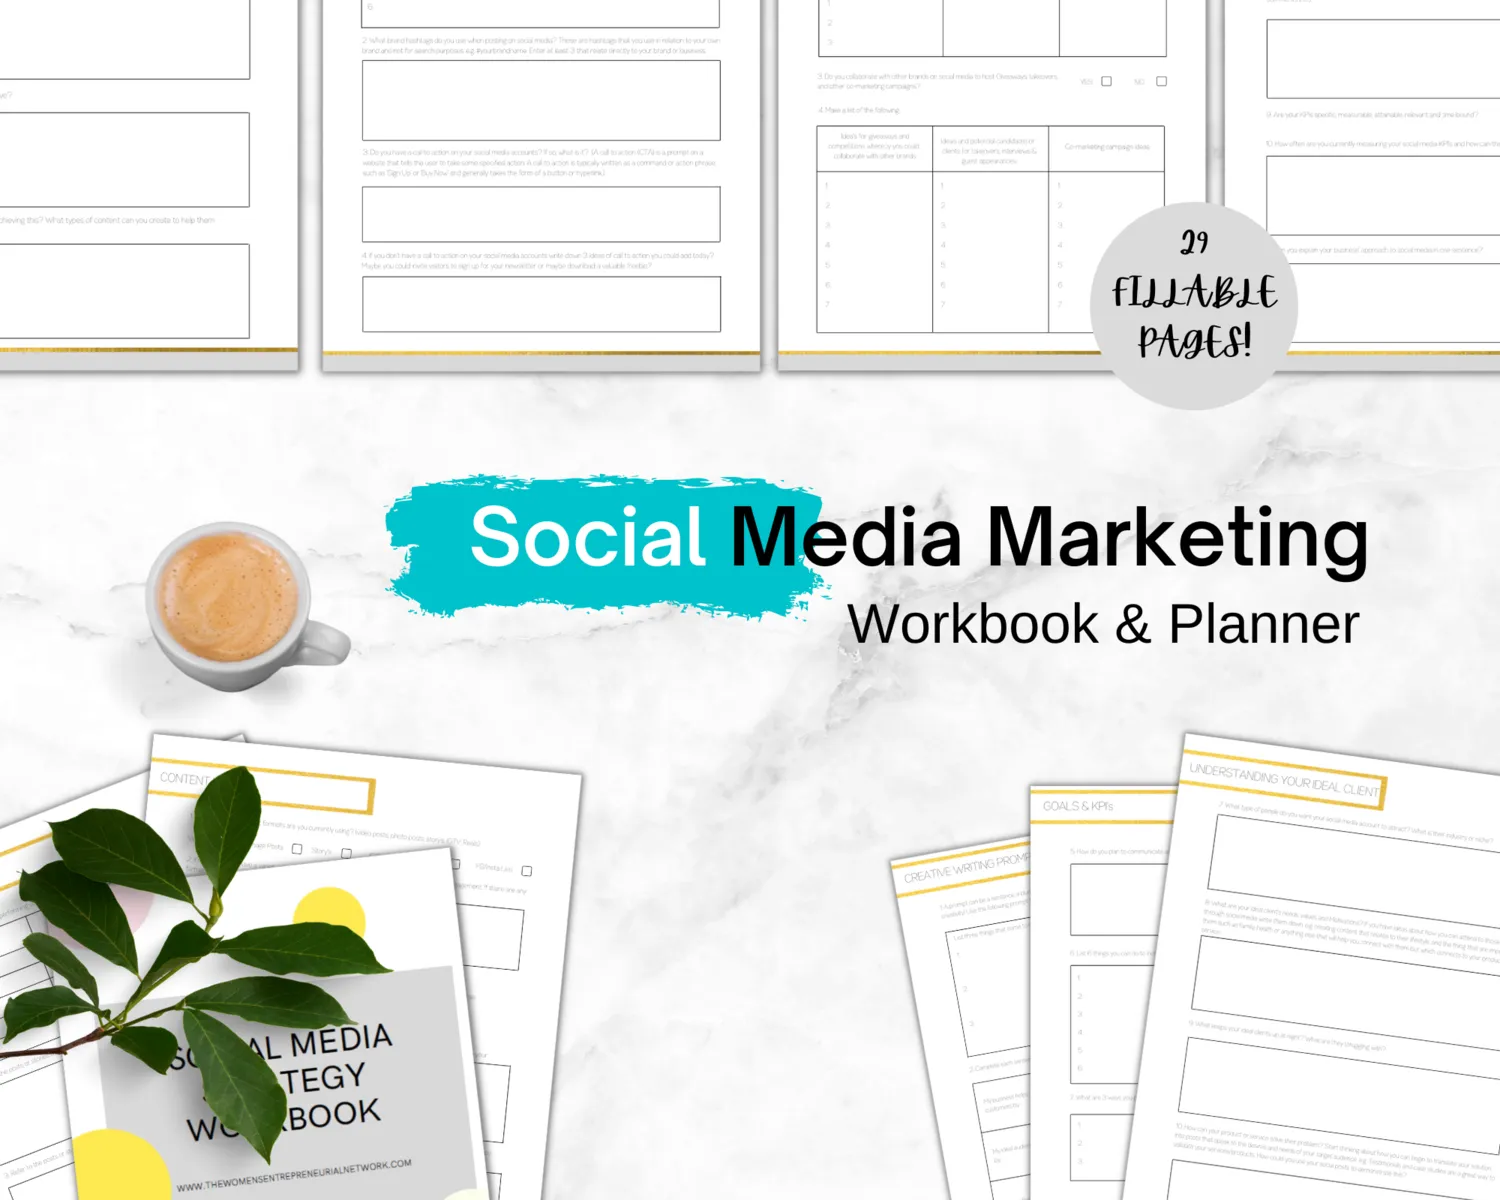 Social Media Workbook, Strategy Guide, and Planner for Explosive Growth